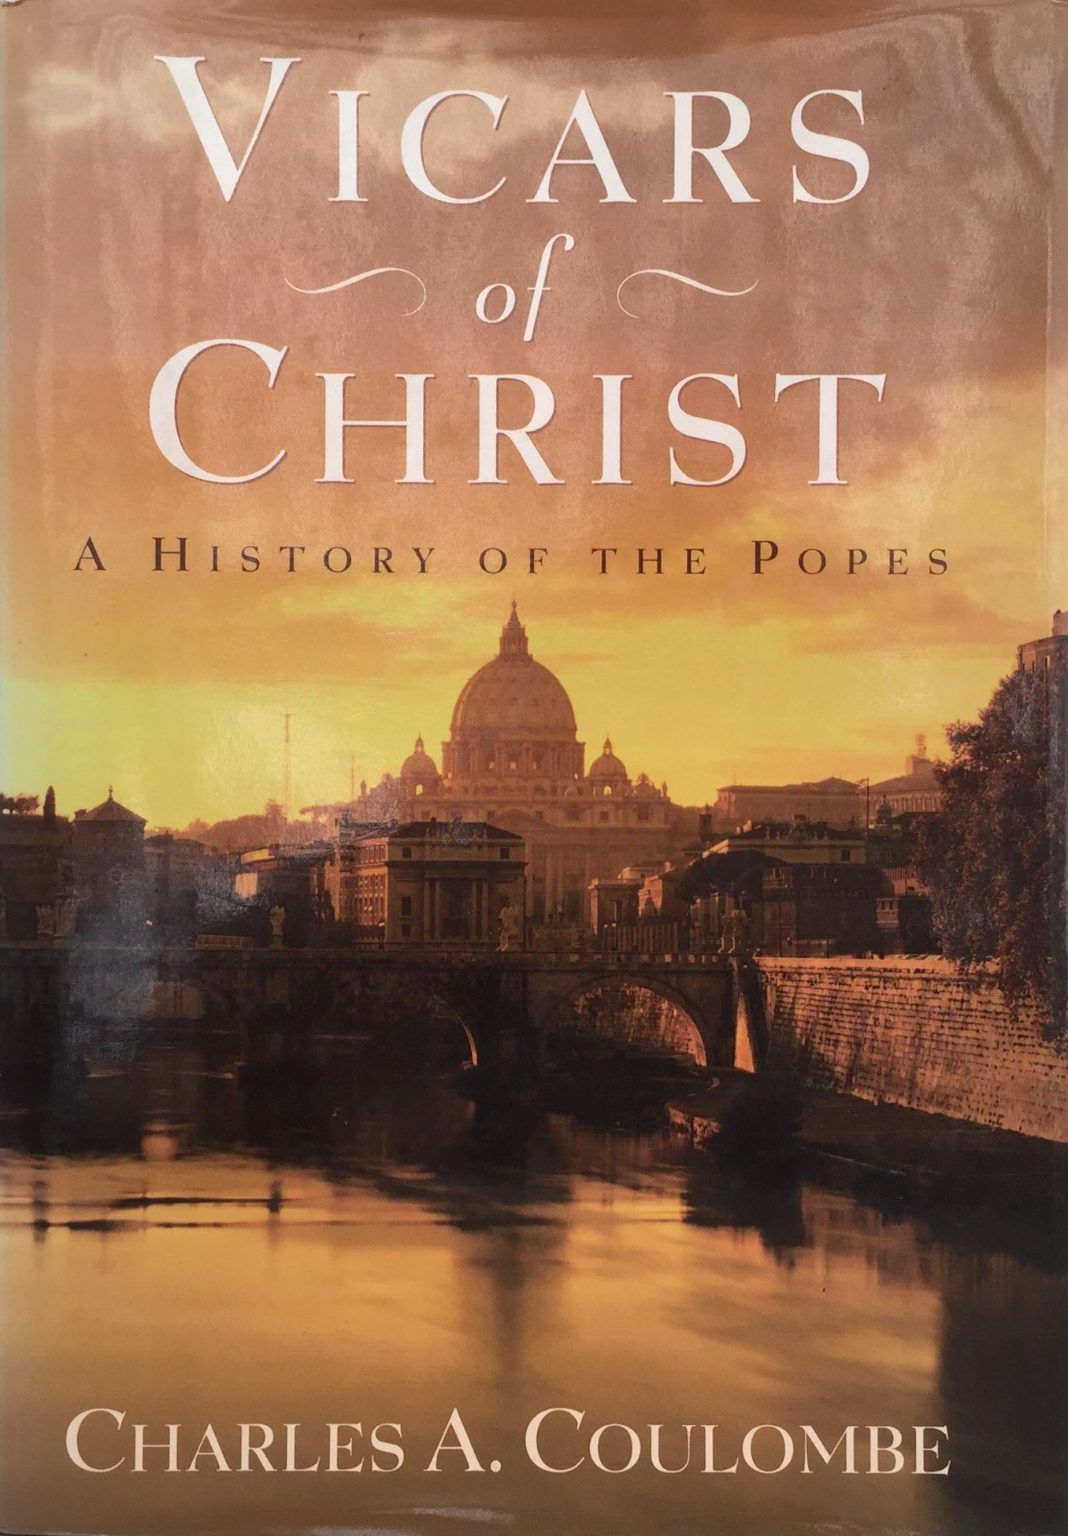 VICARS OF CHRIST: A History of The Popes